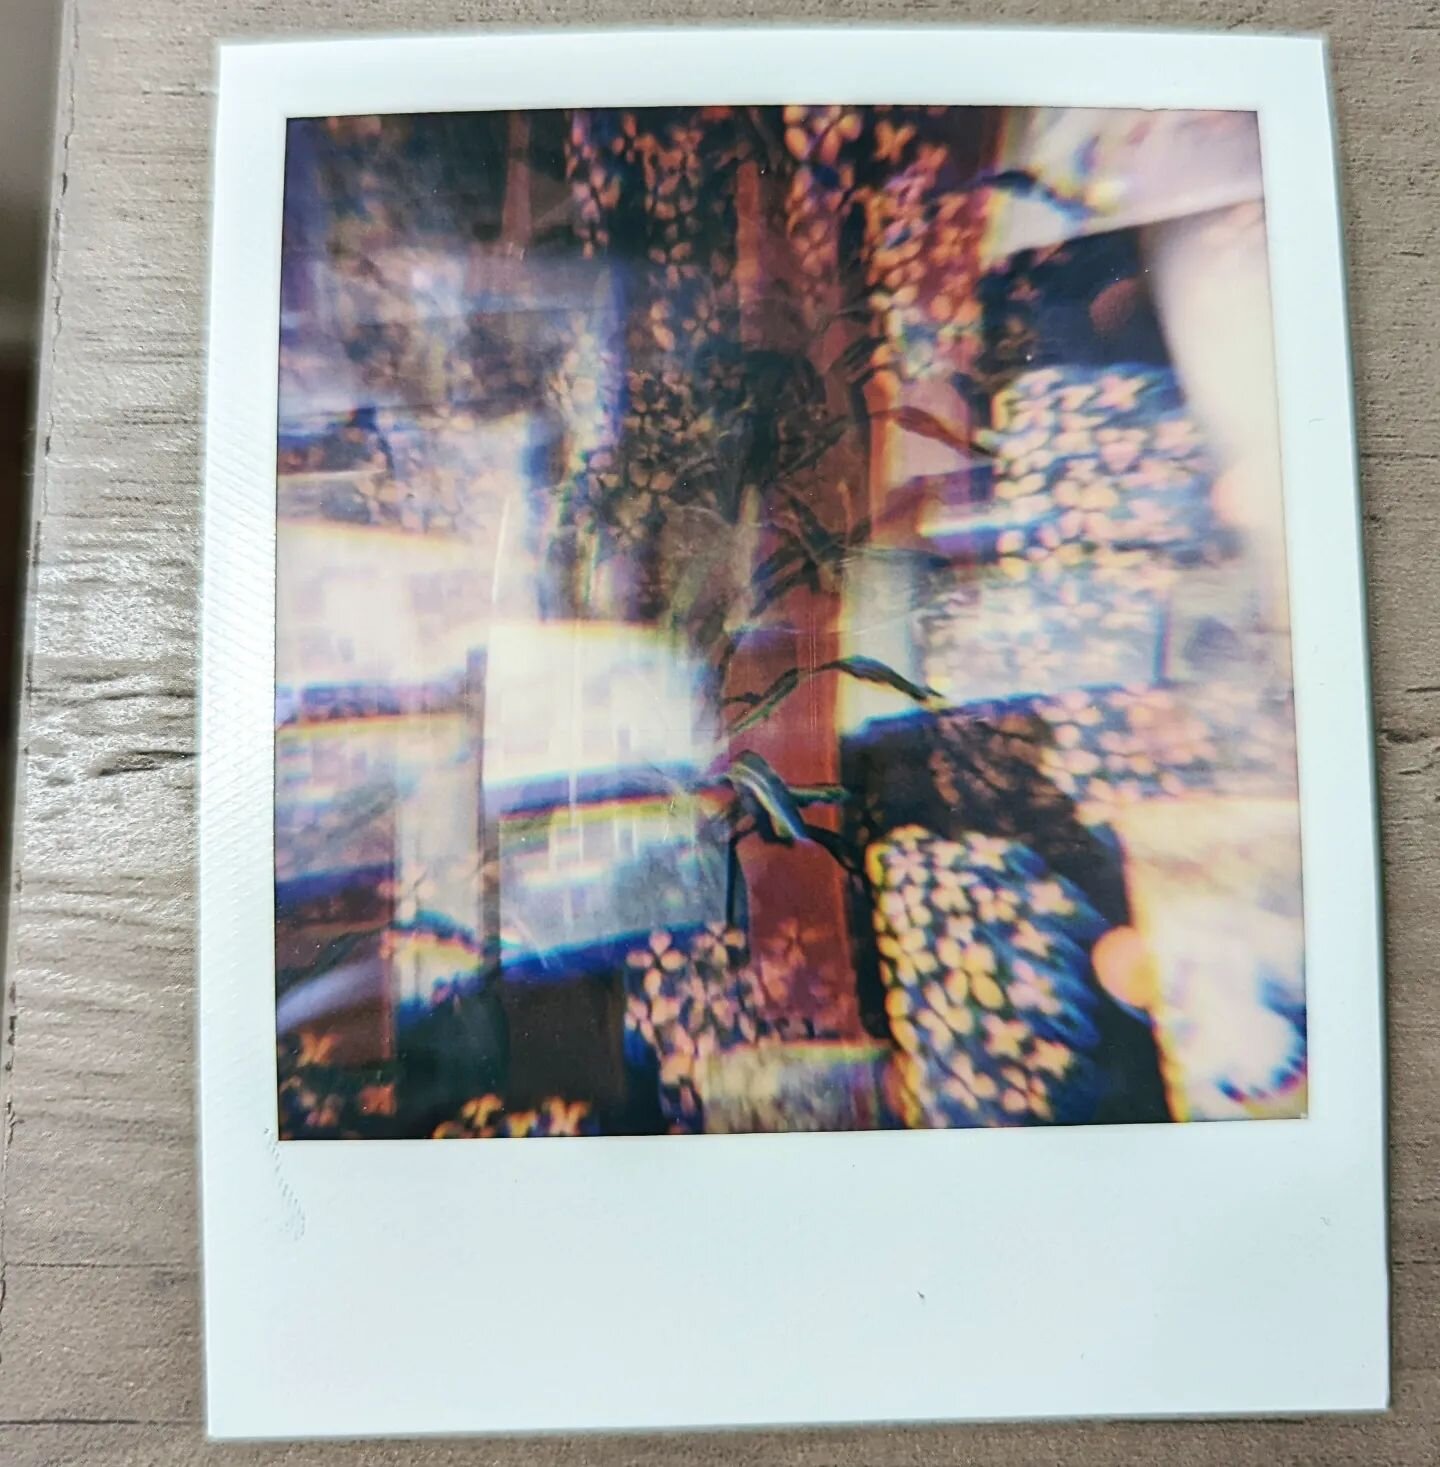 My favorite part of a lovely gift from a friend. &quot;Hydrangeas at night through 💜 prism&quot;. (2021). Alison Courtney. Polaroid. @alisontcourtney 💗